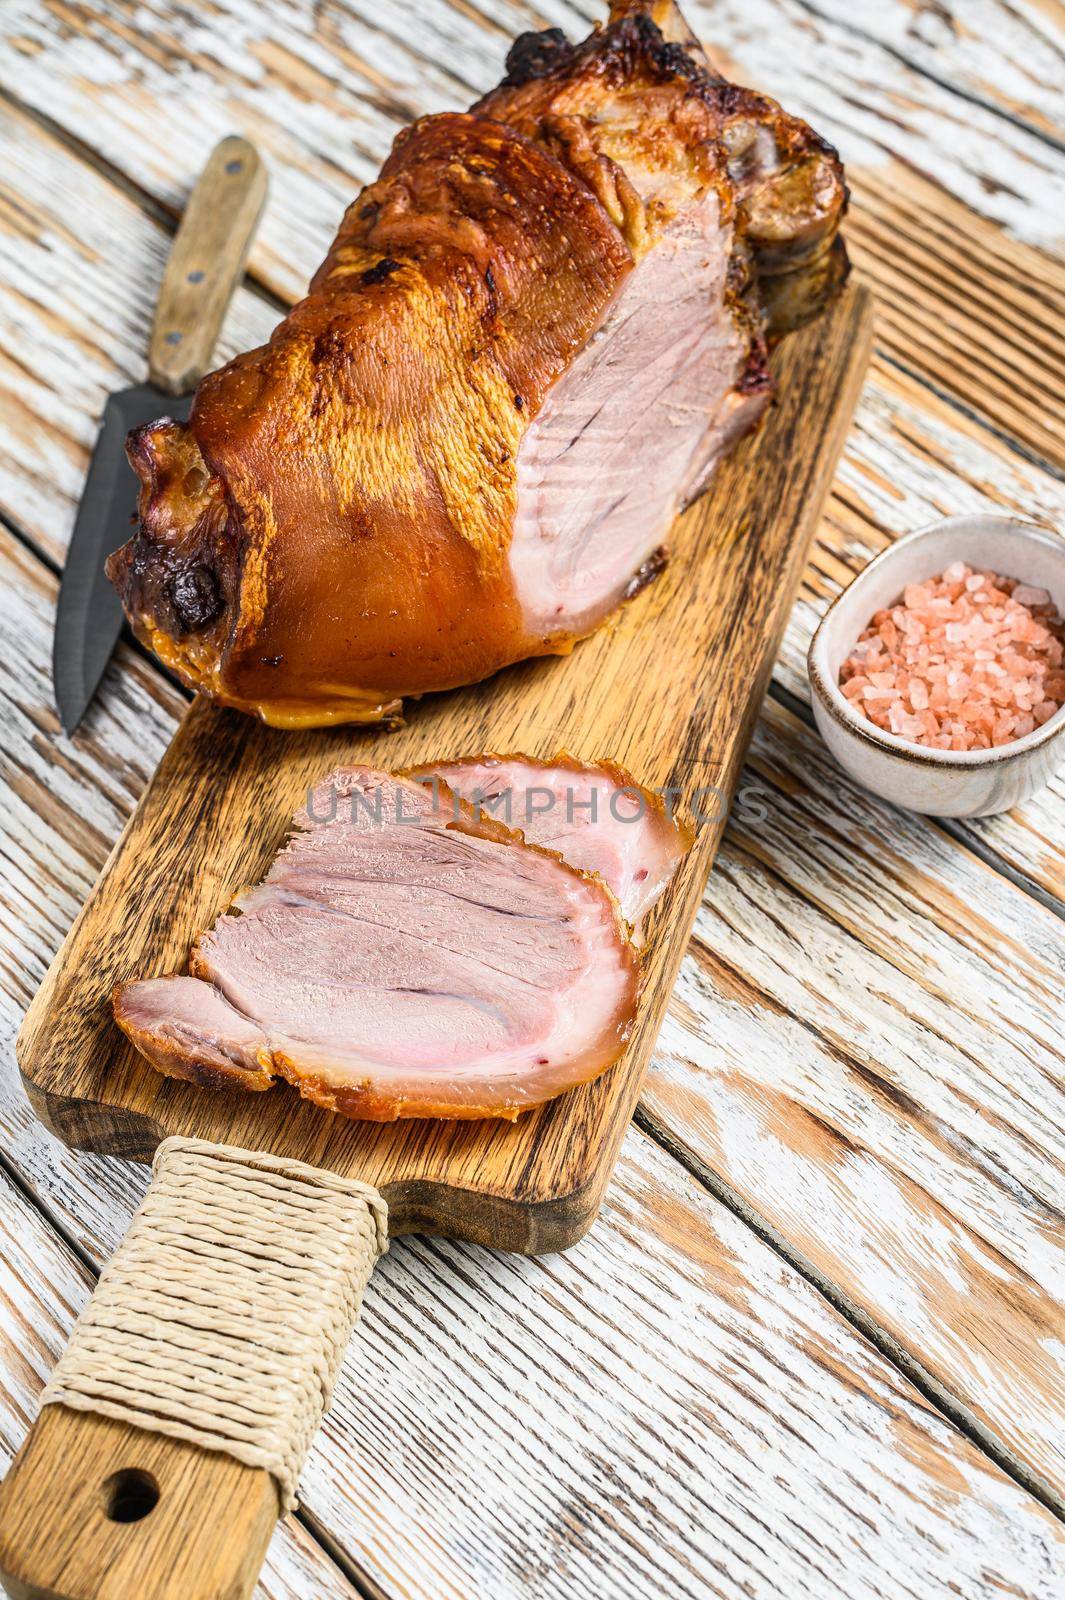 Sliced roasted pork knuckle on a cutting board. wooden background. Top view by Composter